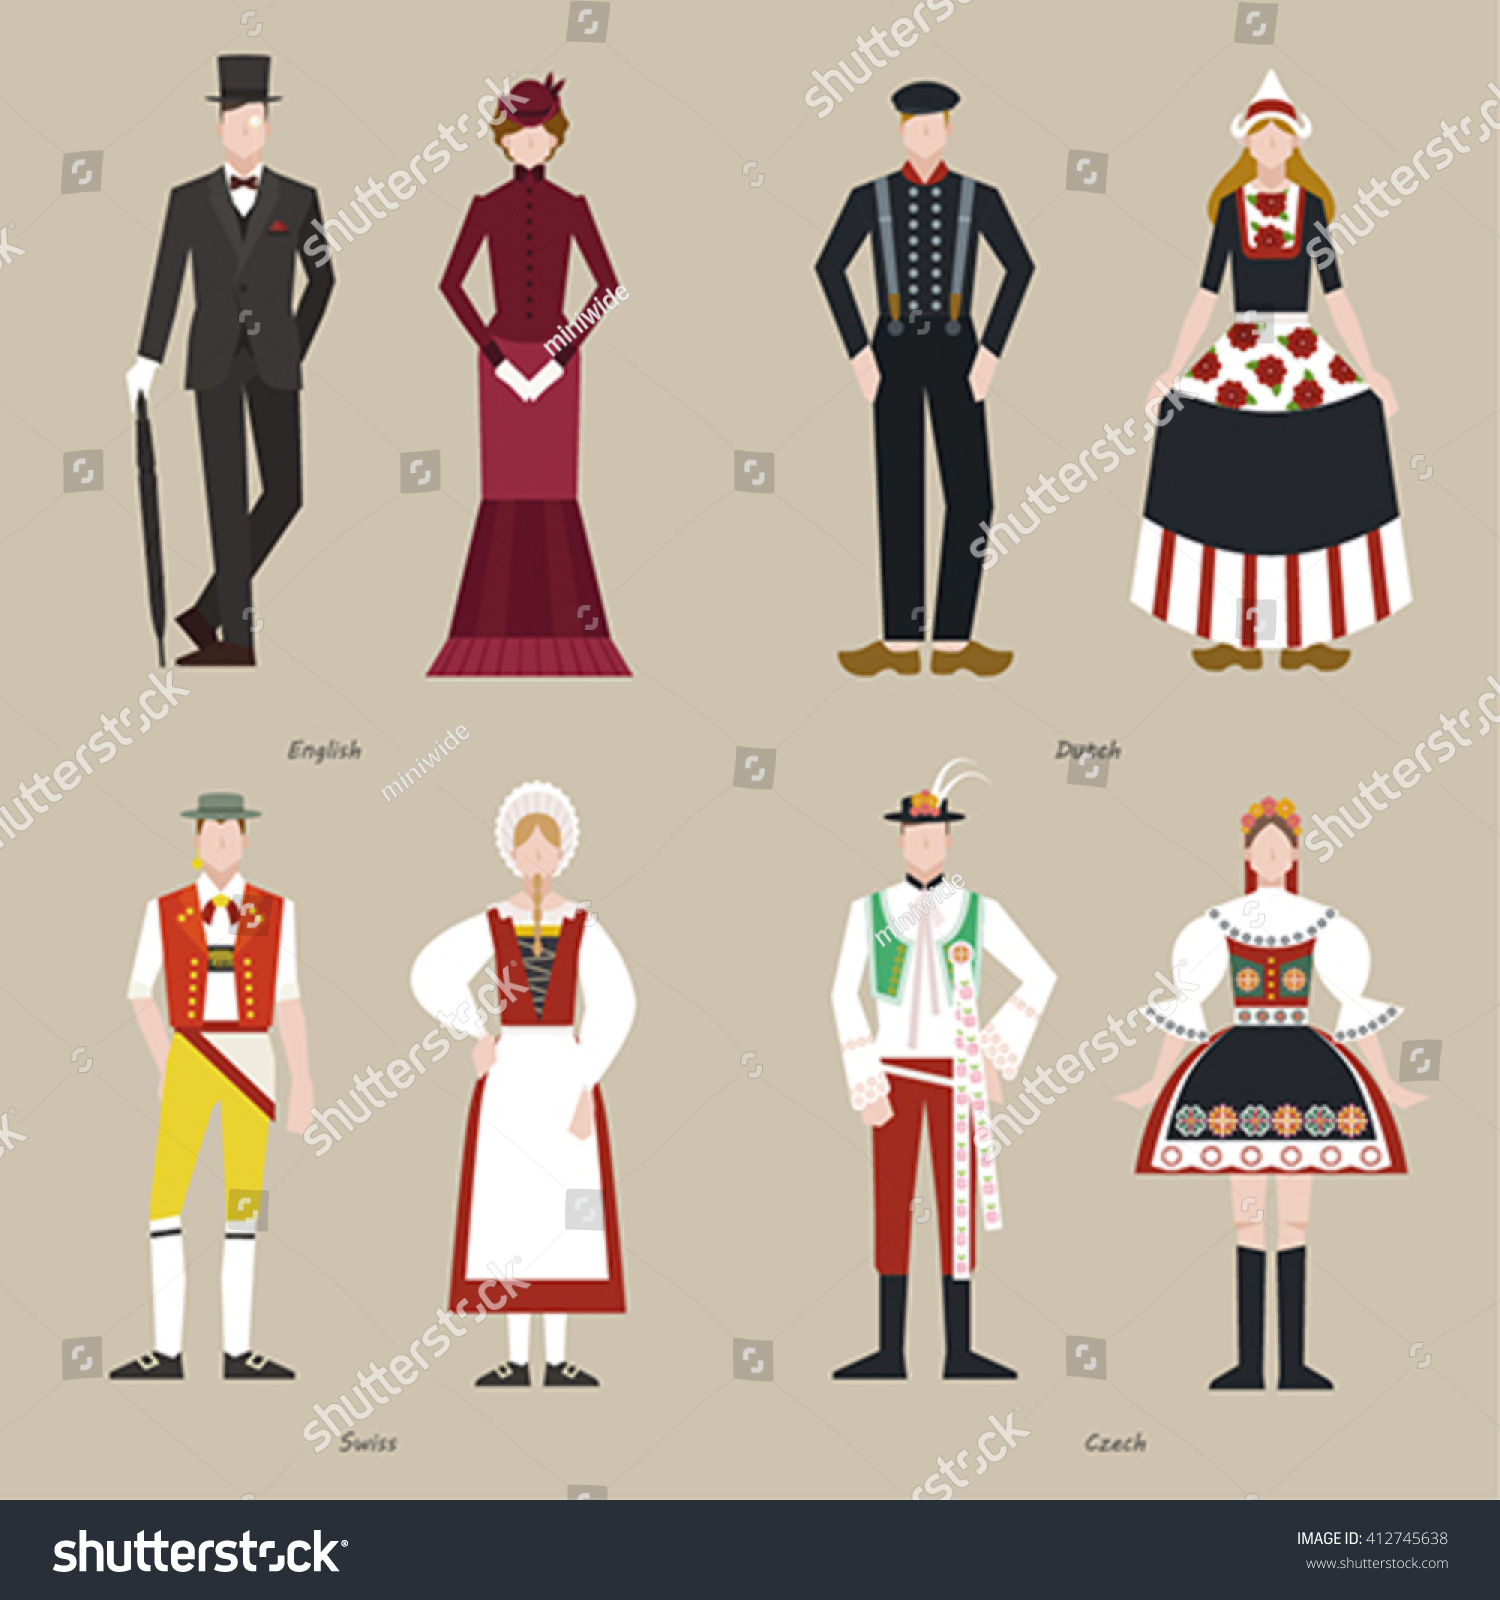 Traditional Costumes Of The World Vector Design - 412745638 : Shutterstock